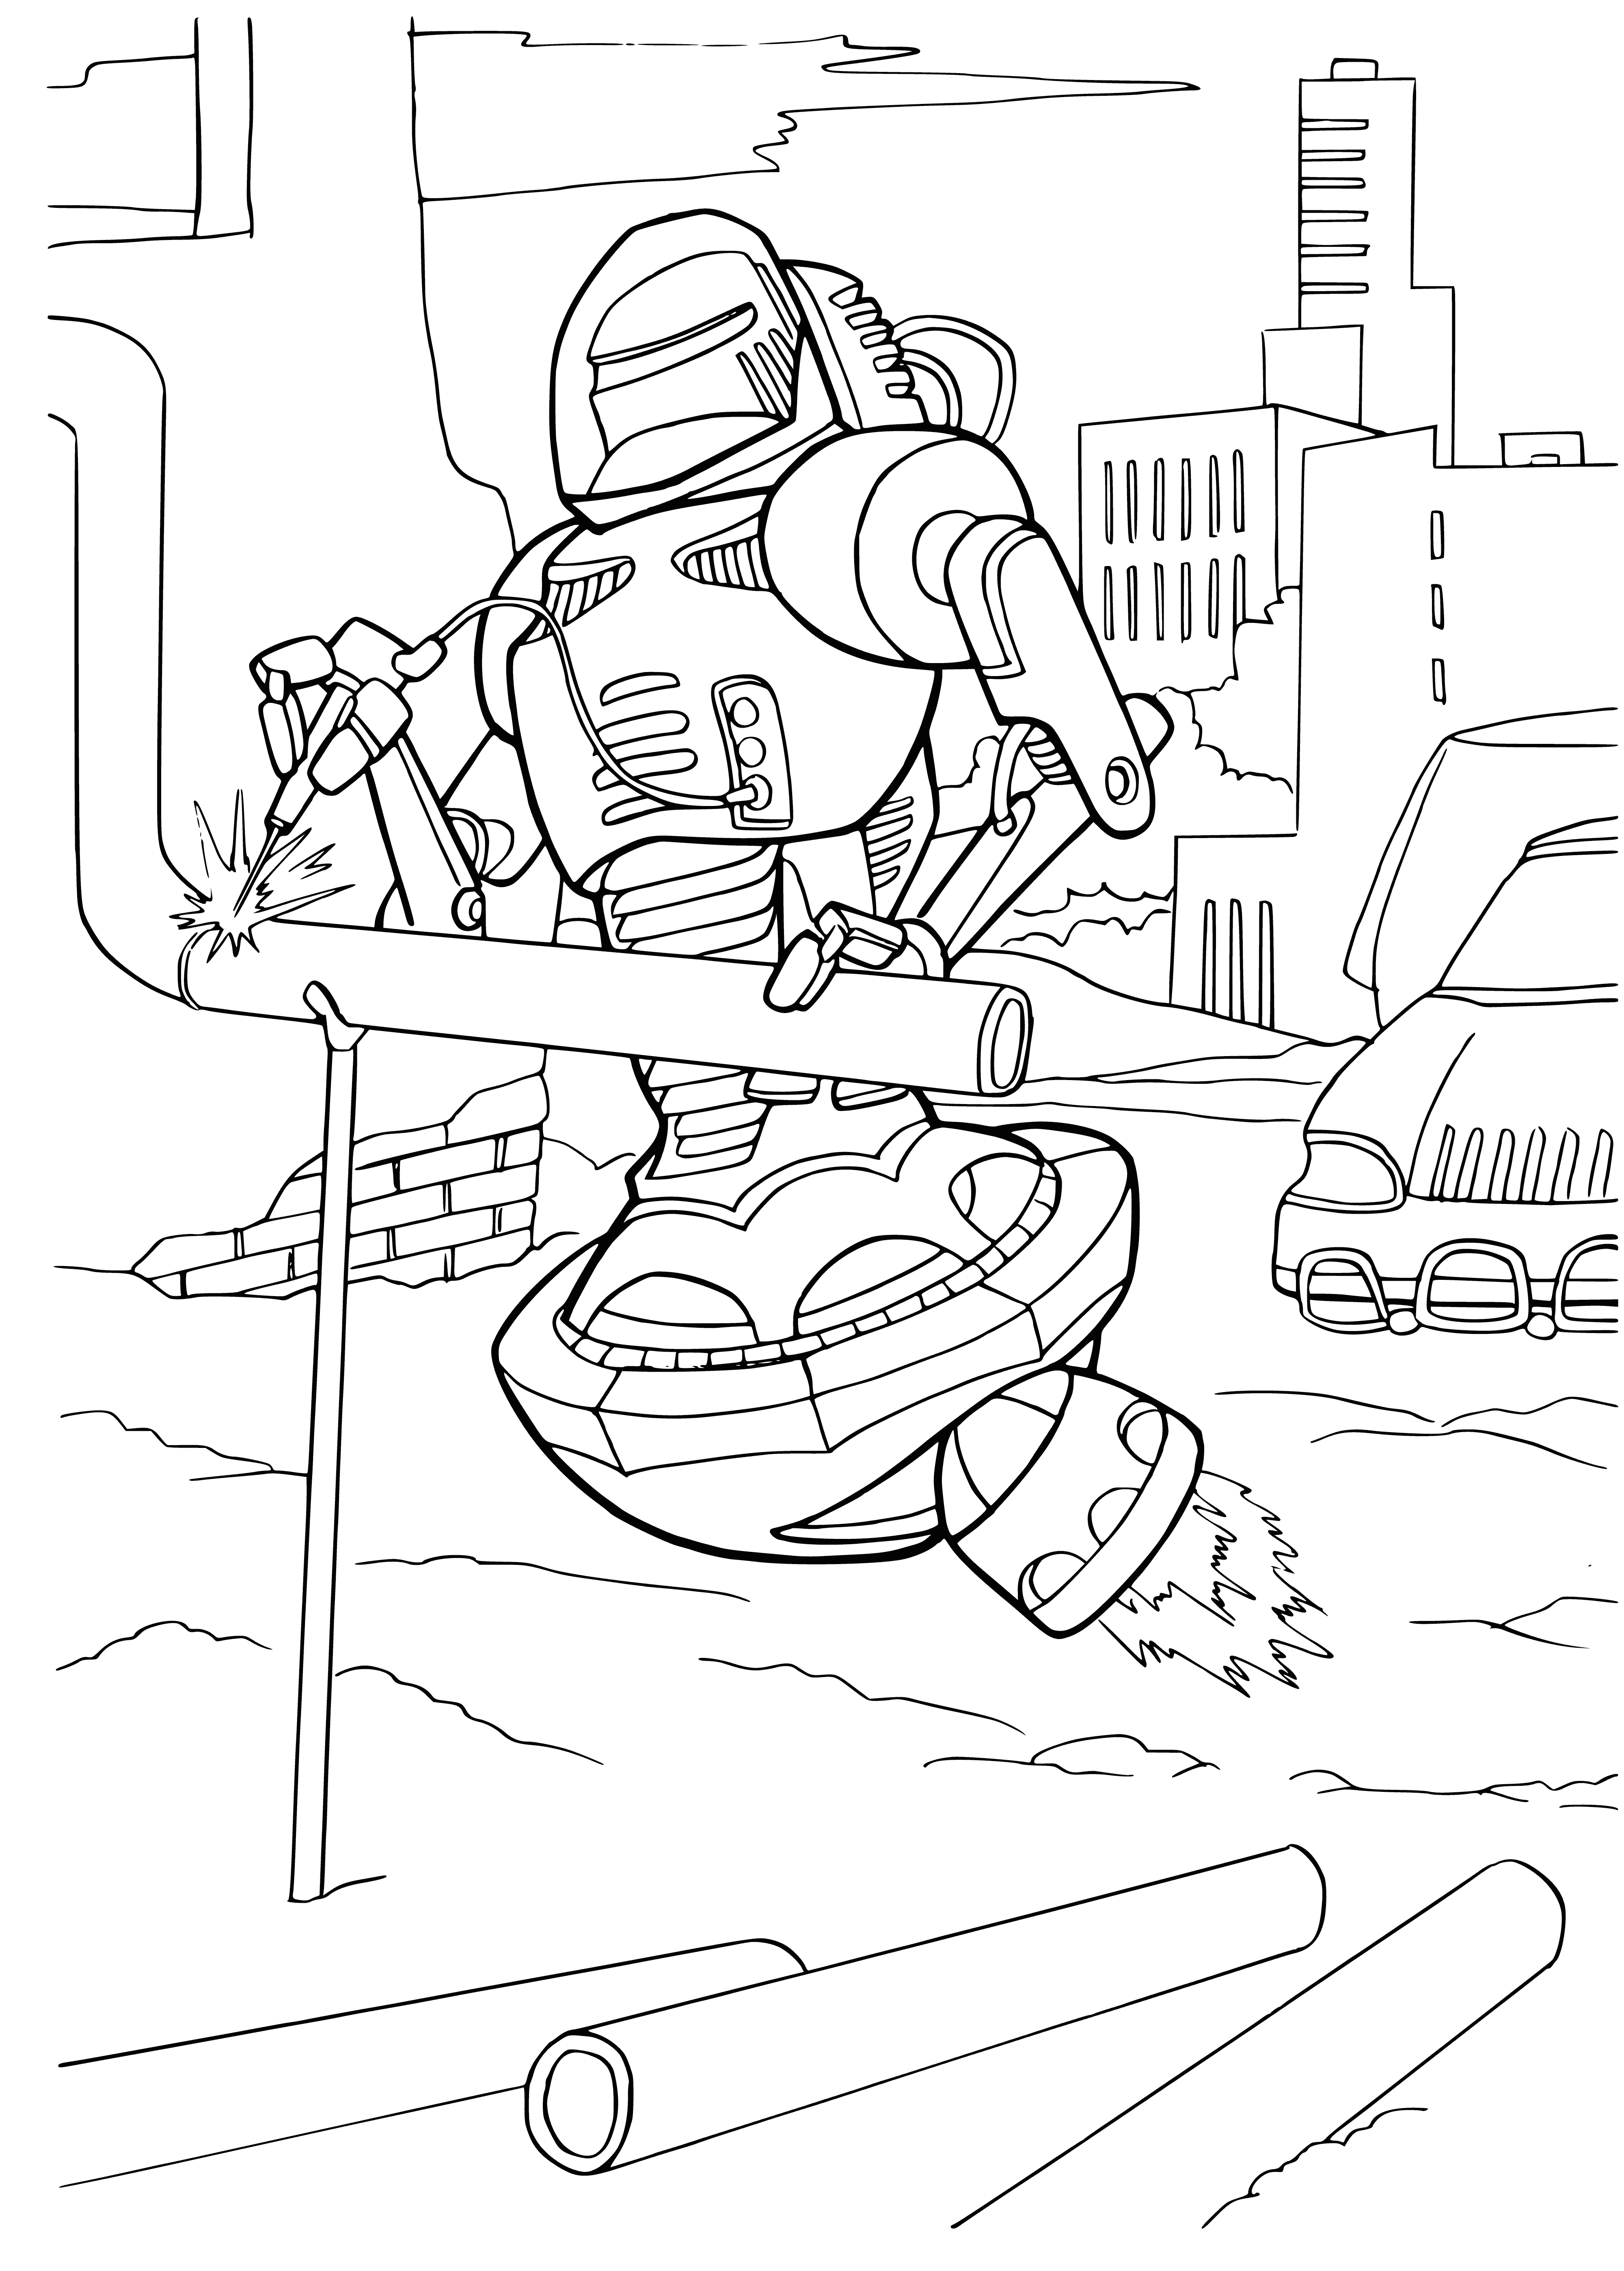 coloring page: Robot welder depicted in coloring page. Has welding torch & shield, stands on metal platform with sparks. Glowing red eyes & humanoid face.